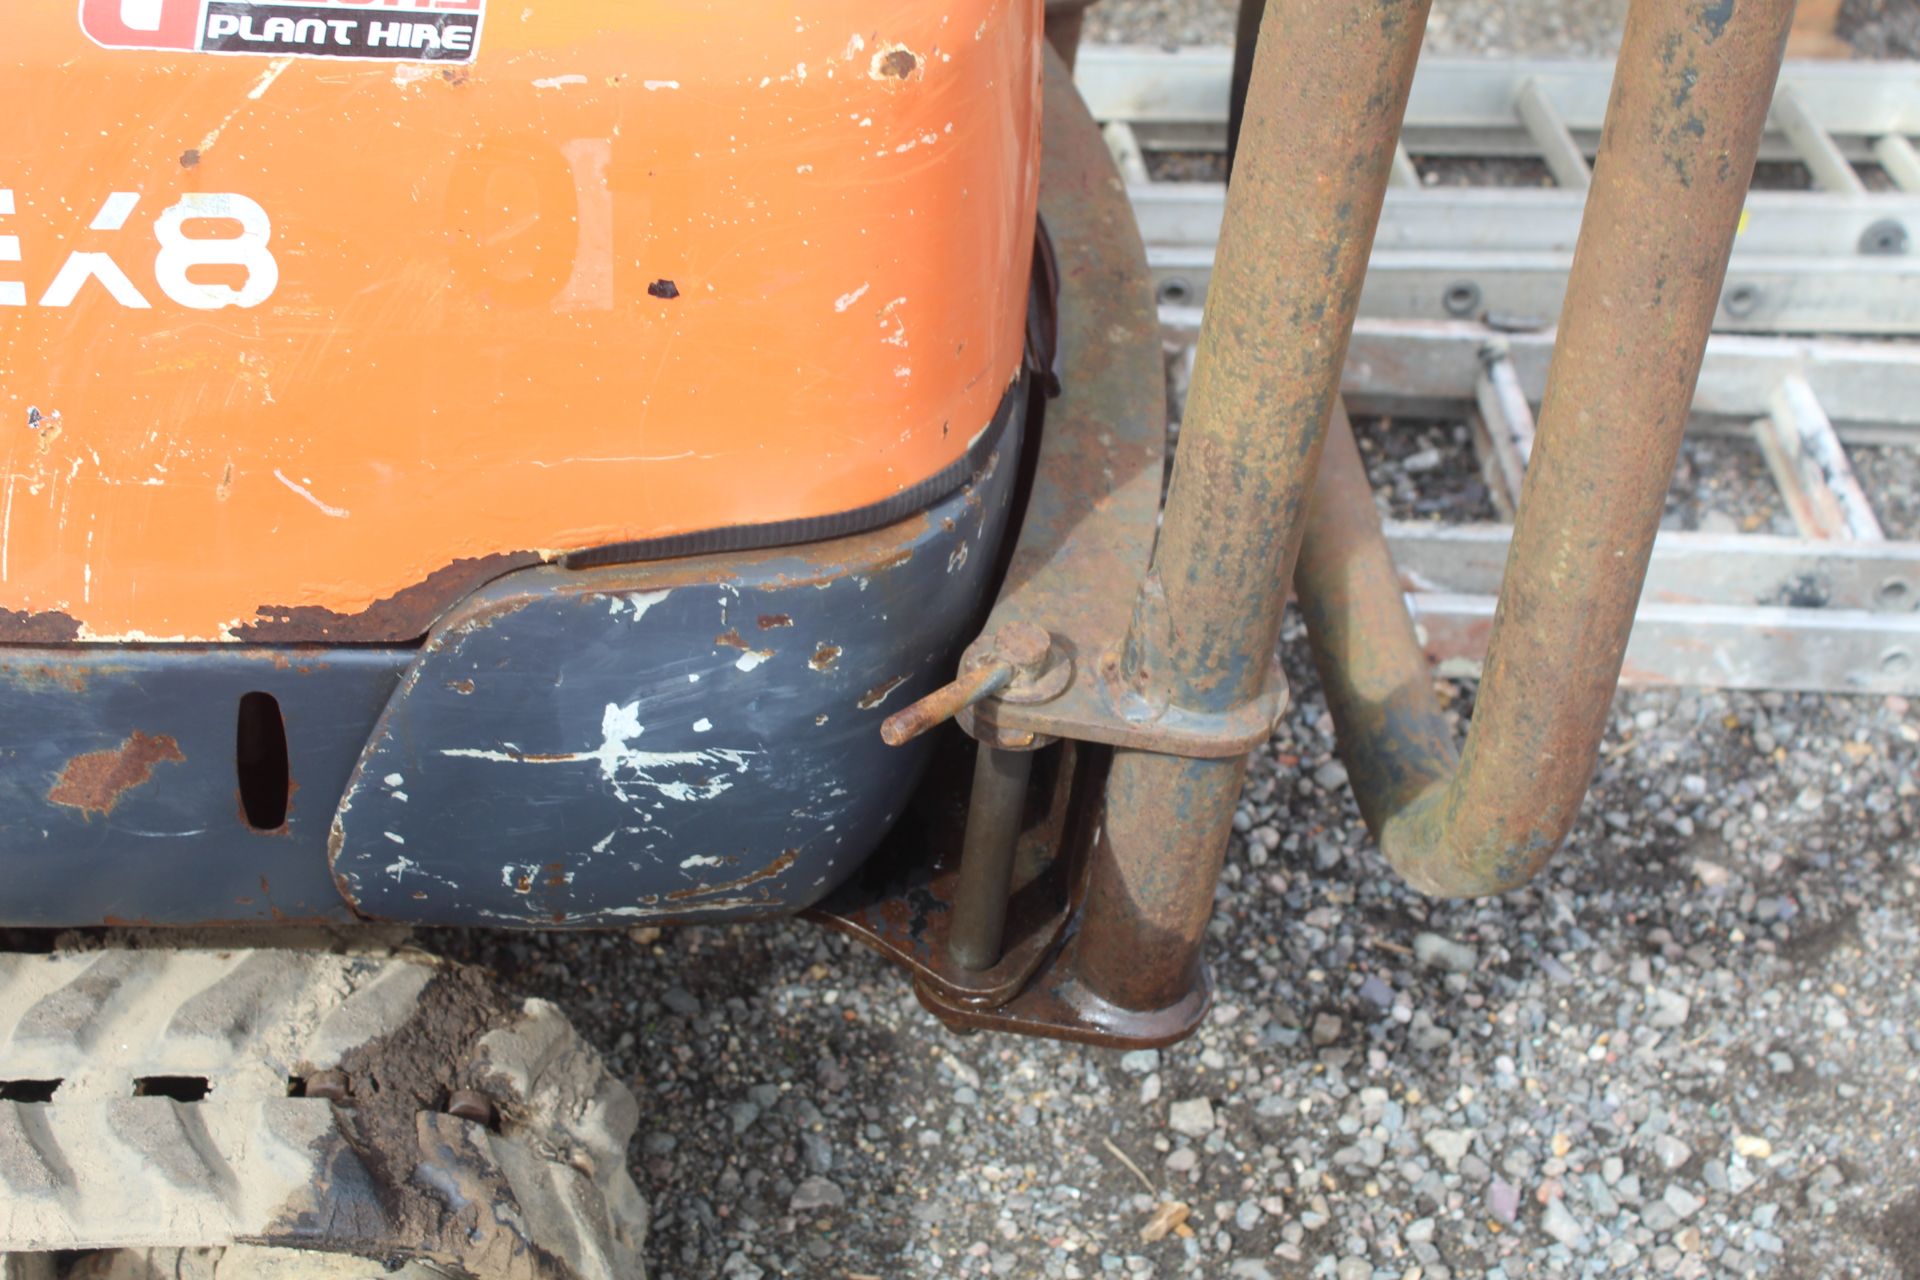 Hitachi EX8-2B 0.8T rubber track micro excavator. 2003. 2,209 hours. Serial number 1AGP004974. - Image 21 of 41